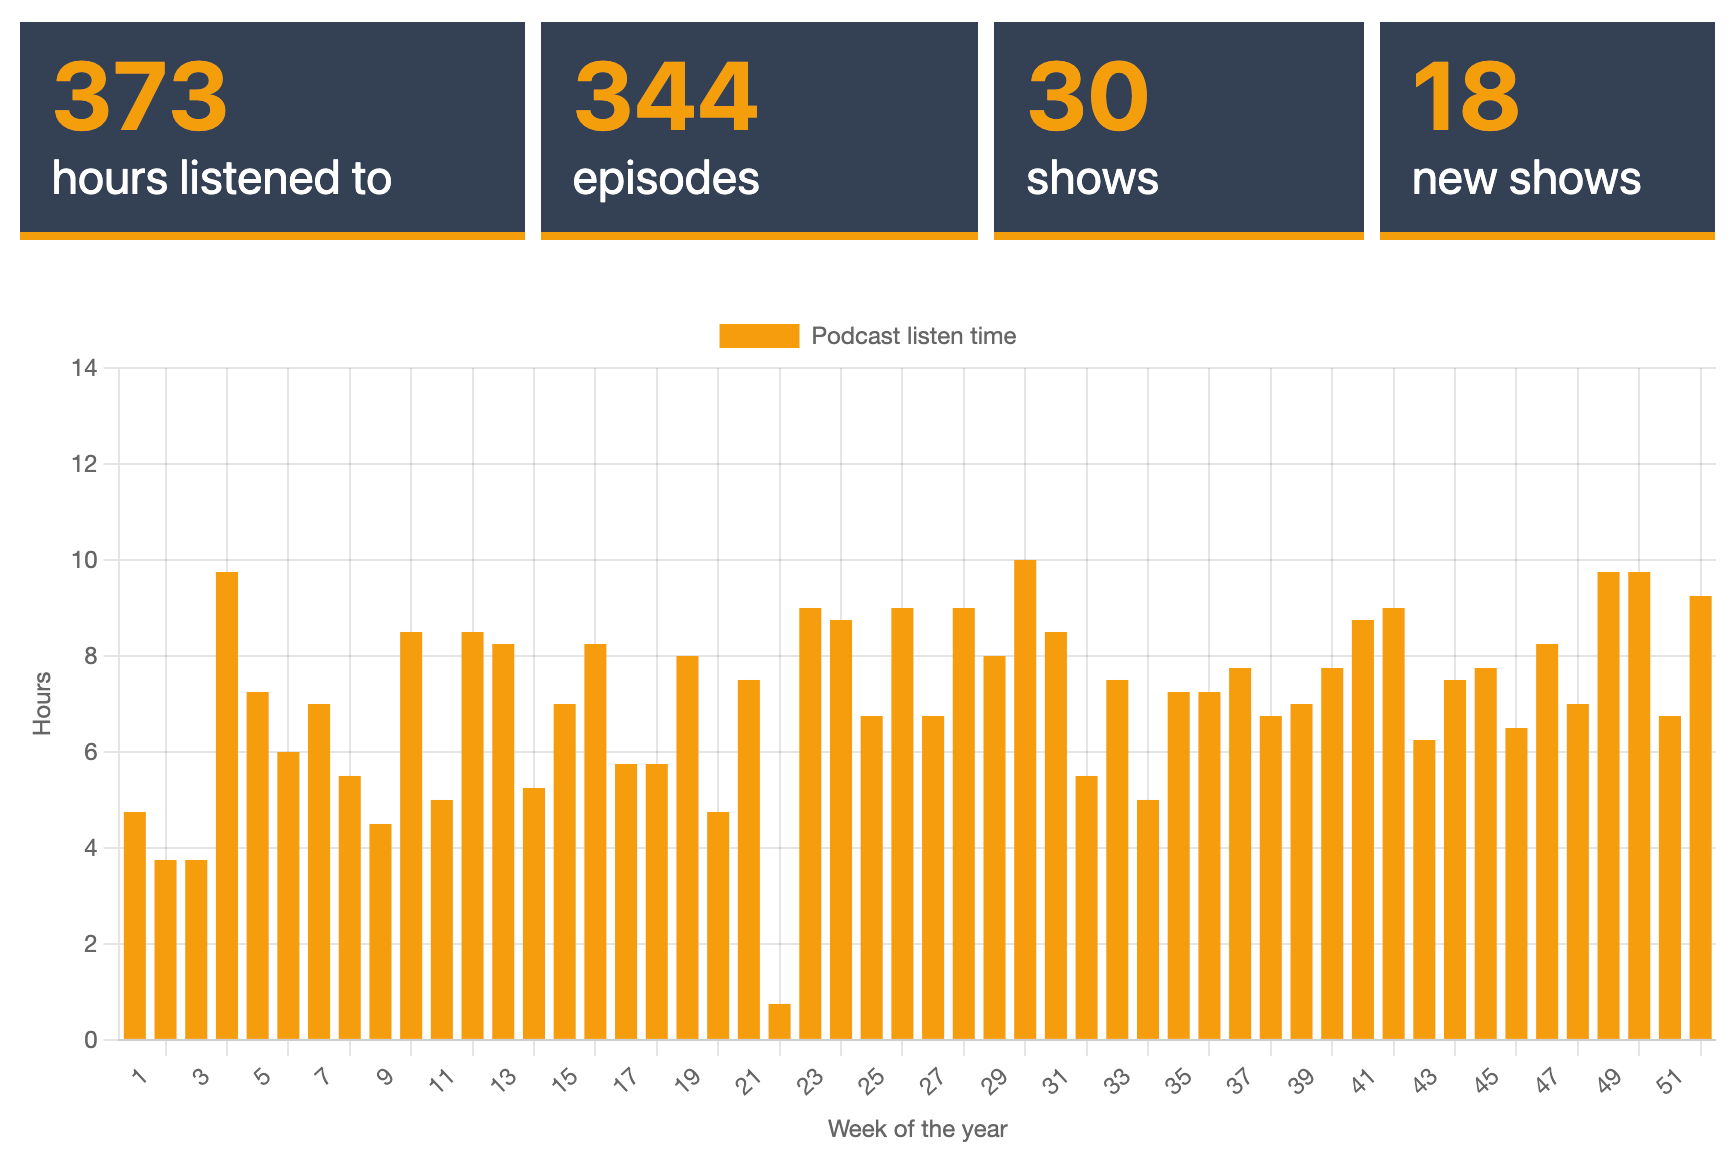 Podcast stats for 2022: 373 hours listened to, 344 episodes, 30 shows, 18 new shows